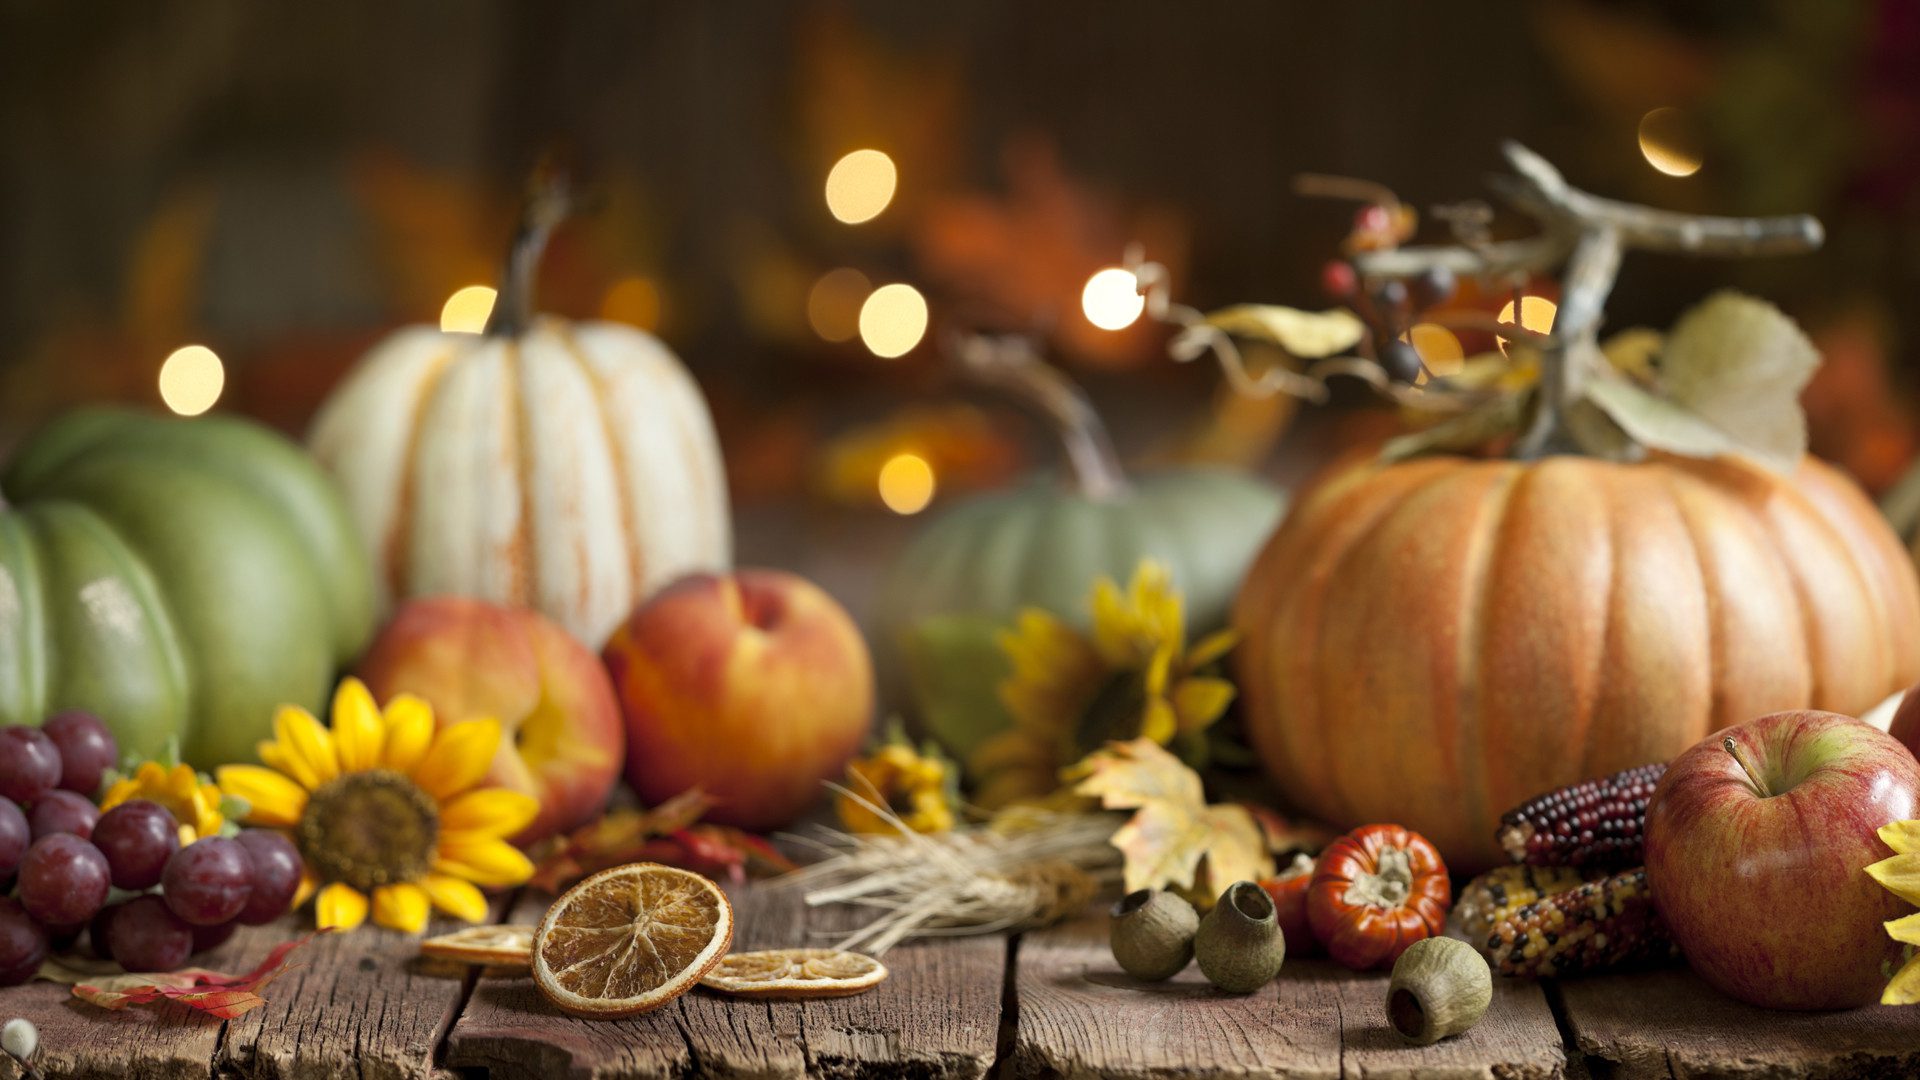 Autumn Virtual Backgrounds, including Fall Leaves, Pumpkins and falling ...